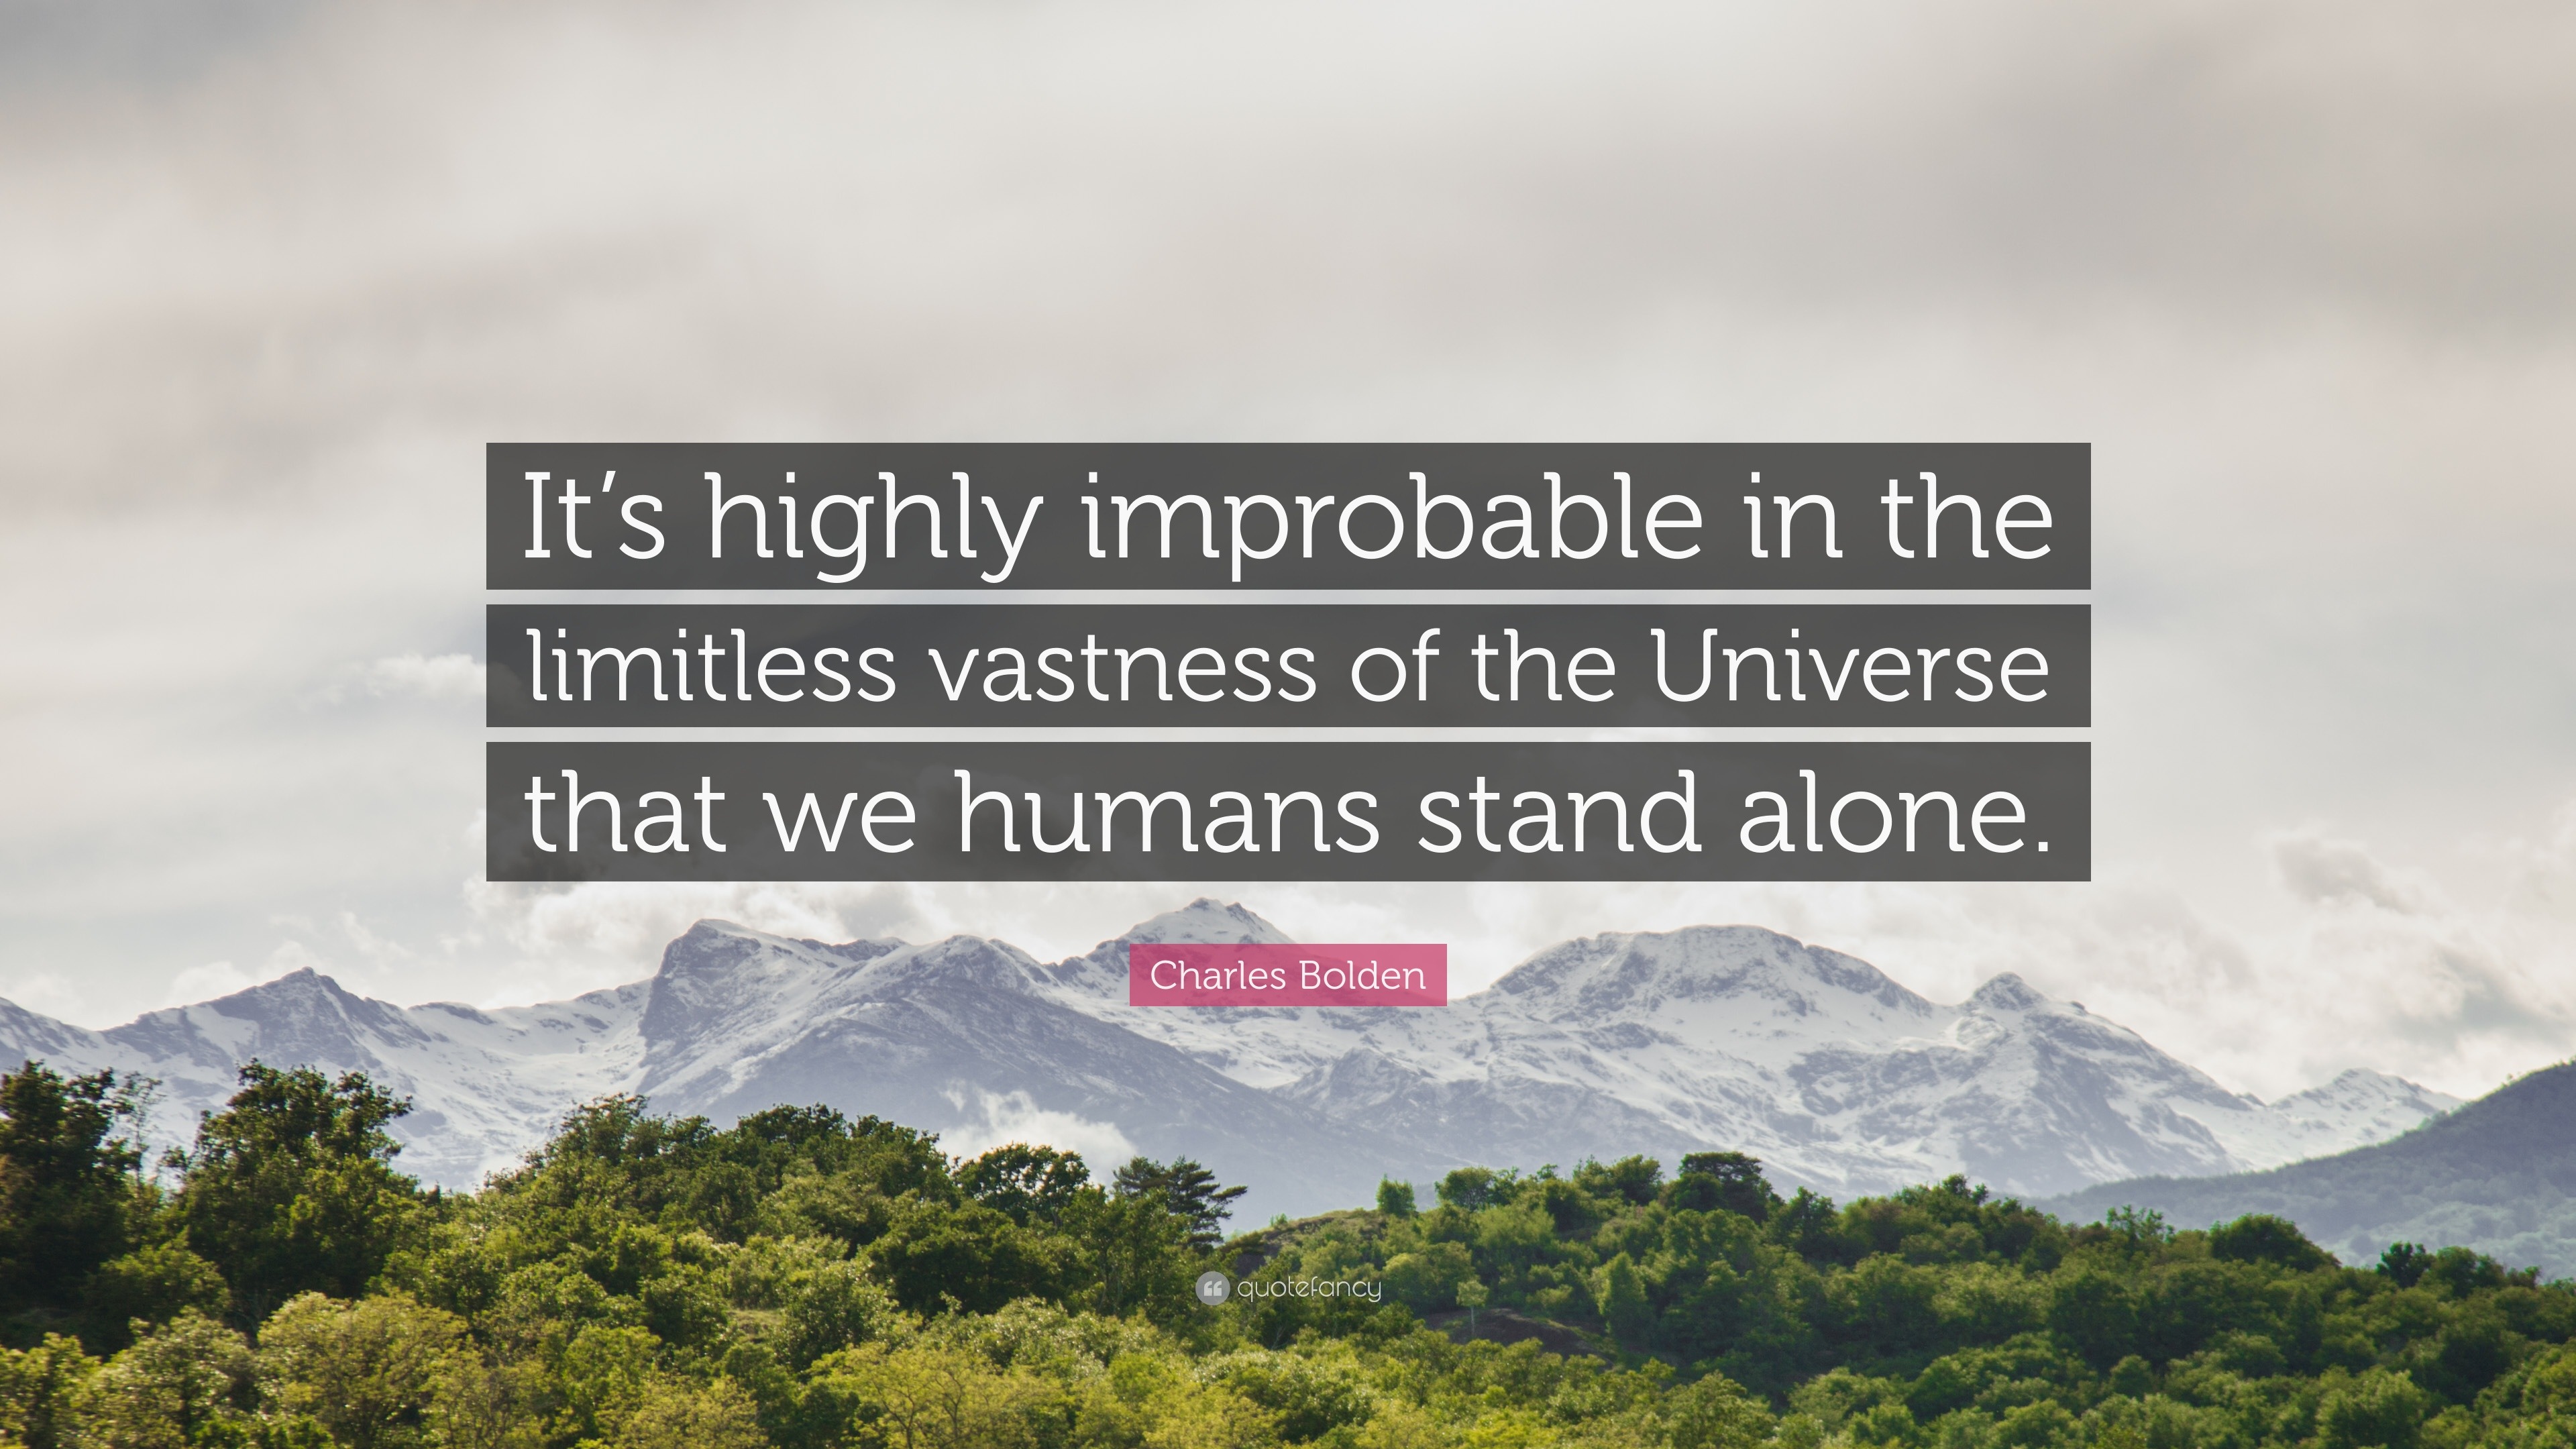 Charles Bolden Quote: “It's highly improbable in the limitless vastness of  the Universe that we humans